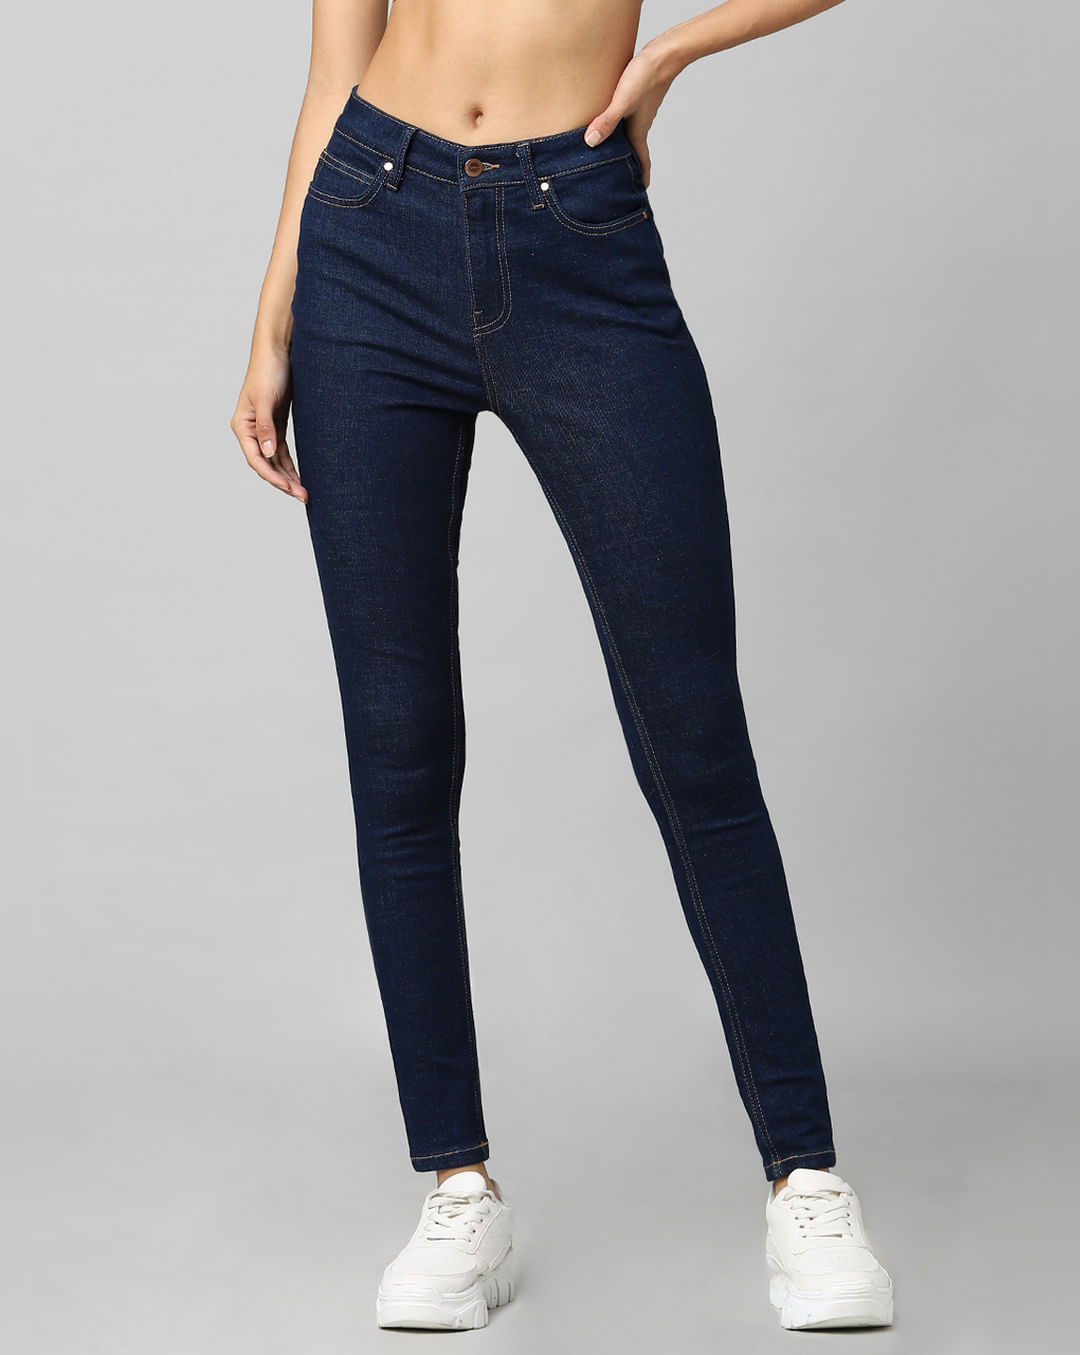 Denim Women with Control Pants for Women for sale